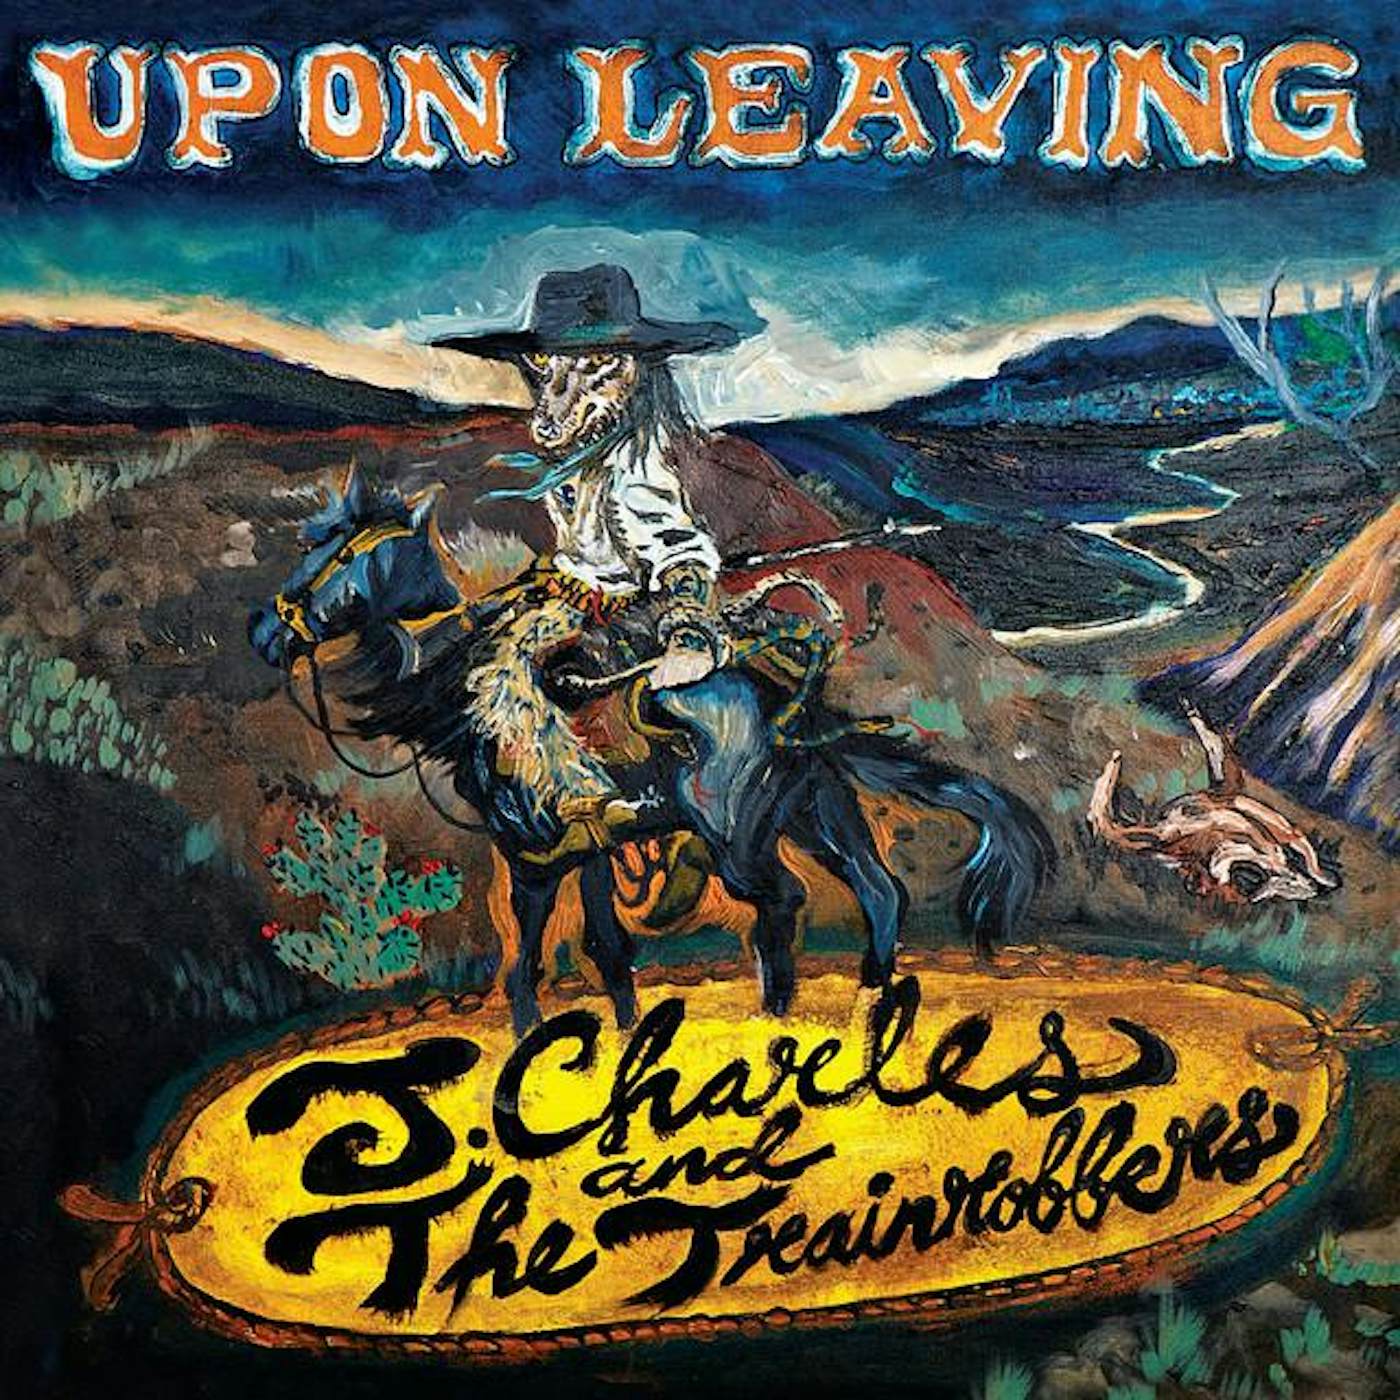 J. Charles and The Trainrobbers